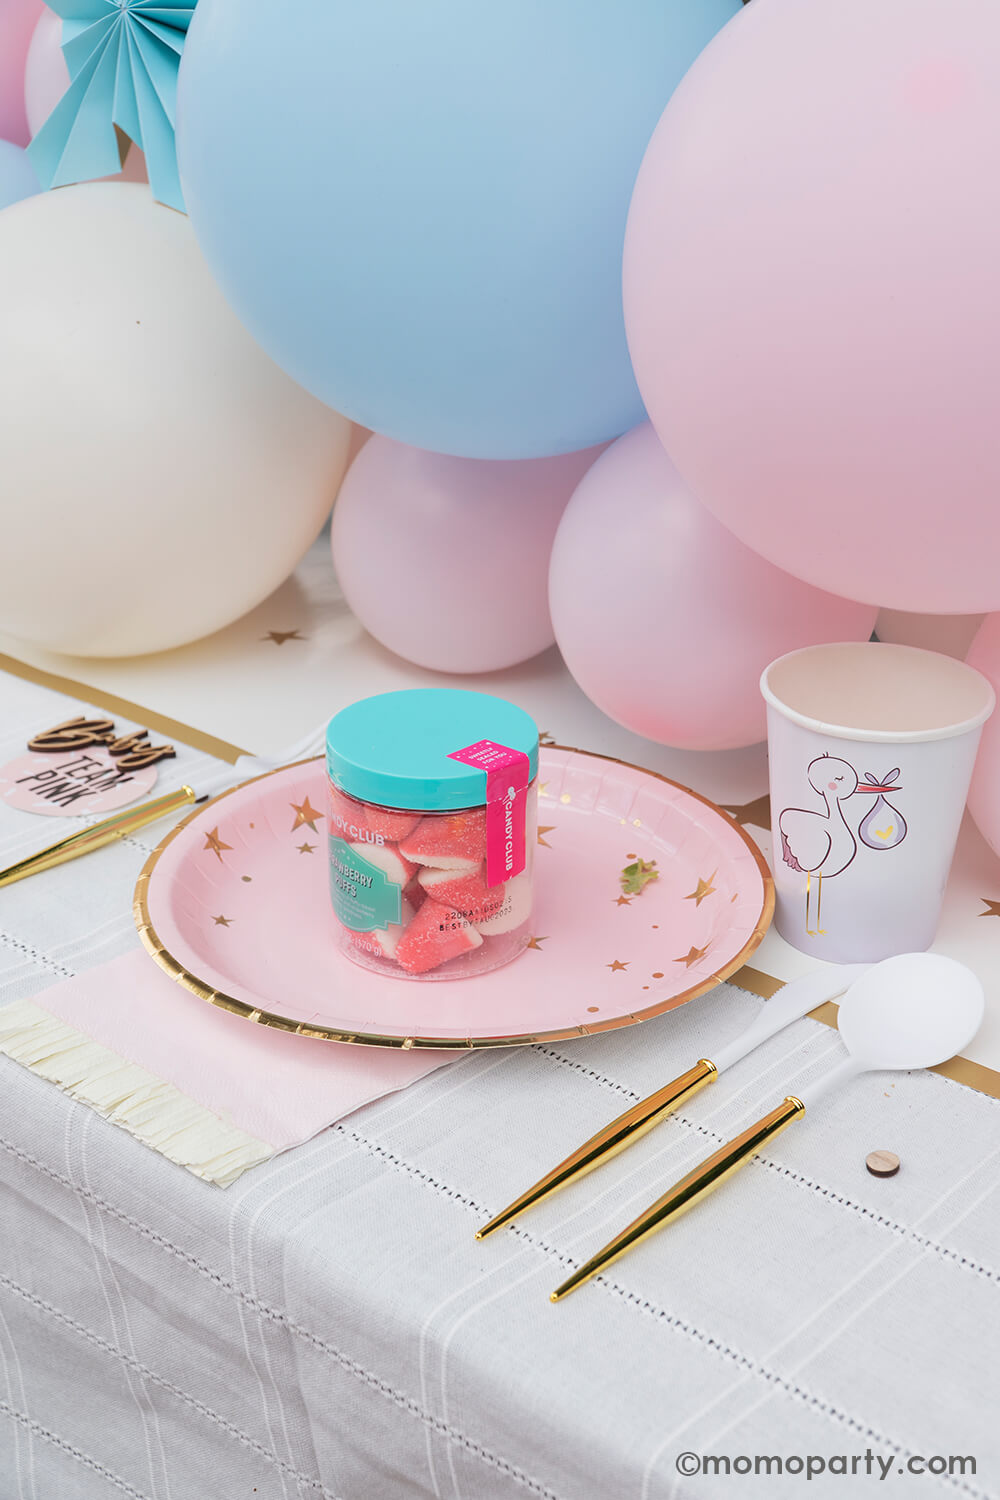 A gorgeous gender reveal party featuring pastel pink and blue decorations, balloons and tableware including My Mind's Eye Baby star plates, pink fringe napkins, stork cups by Slant Collection, and Sophistiplate Bella gold reusable cutlery